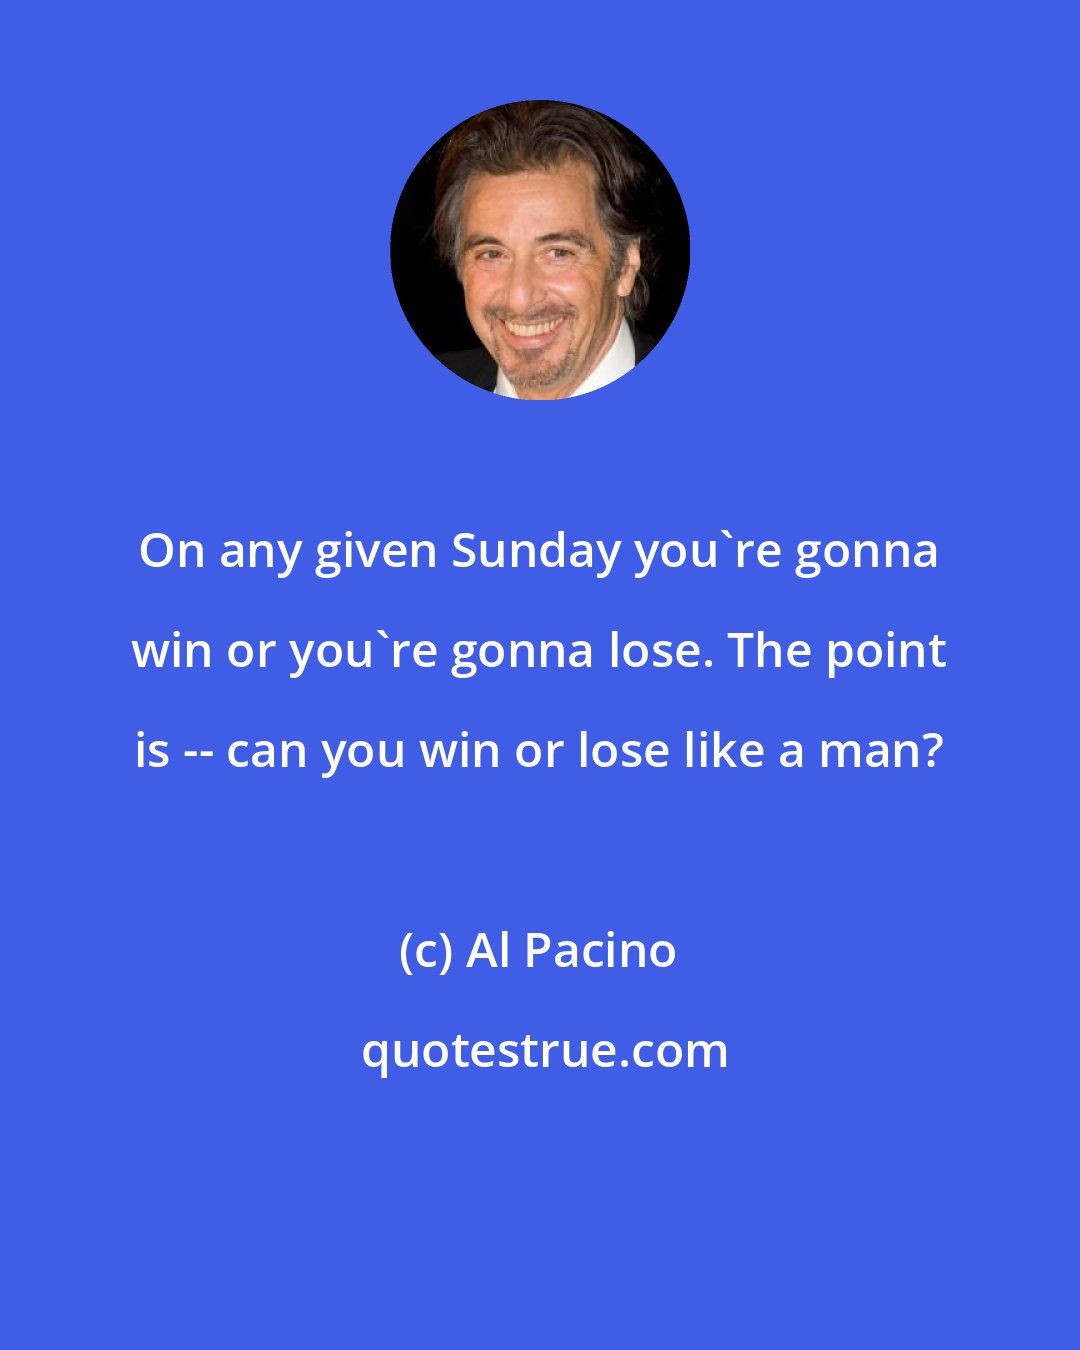 Al Pacino: On any given Sunday you're gonna win or you're gonna lose. The point is -- can you win or lose like a man?